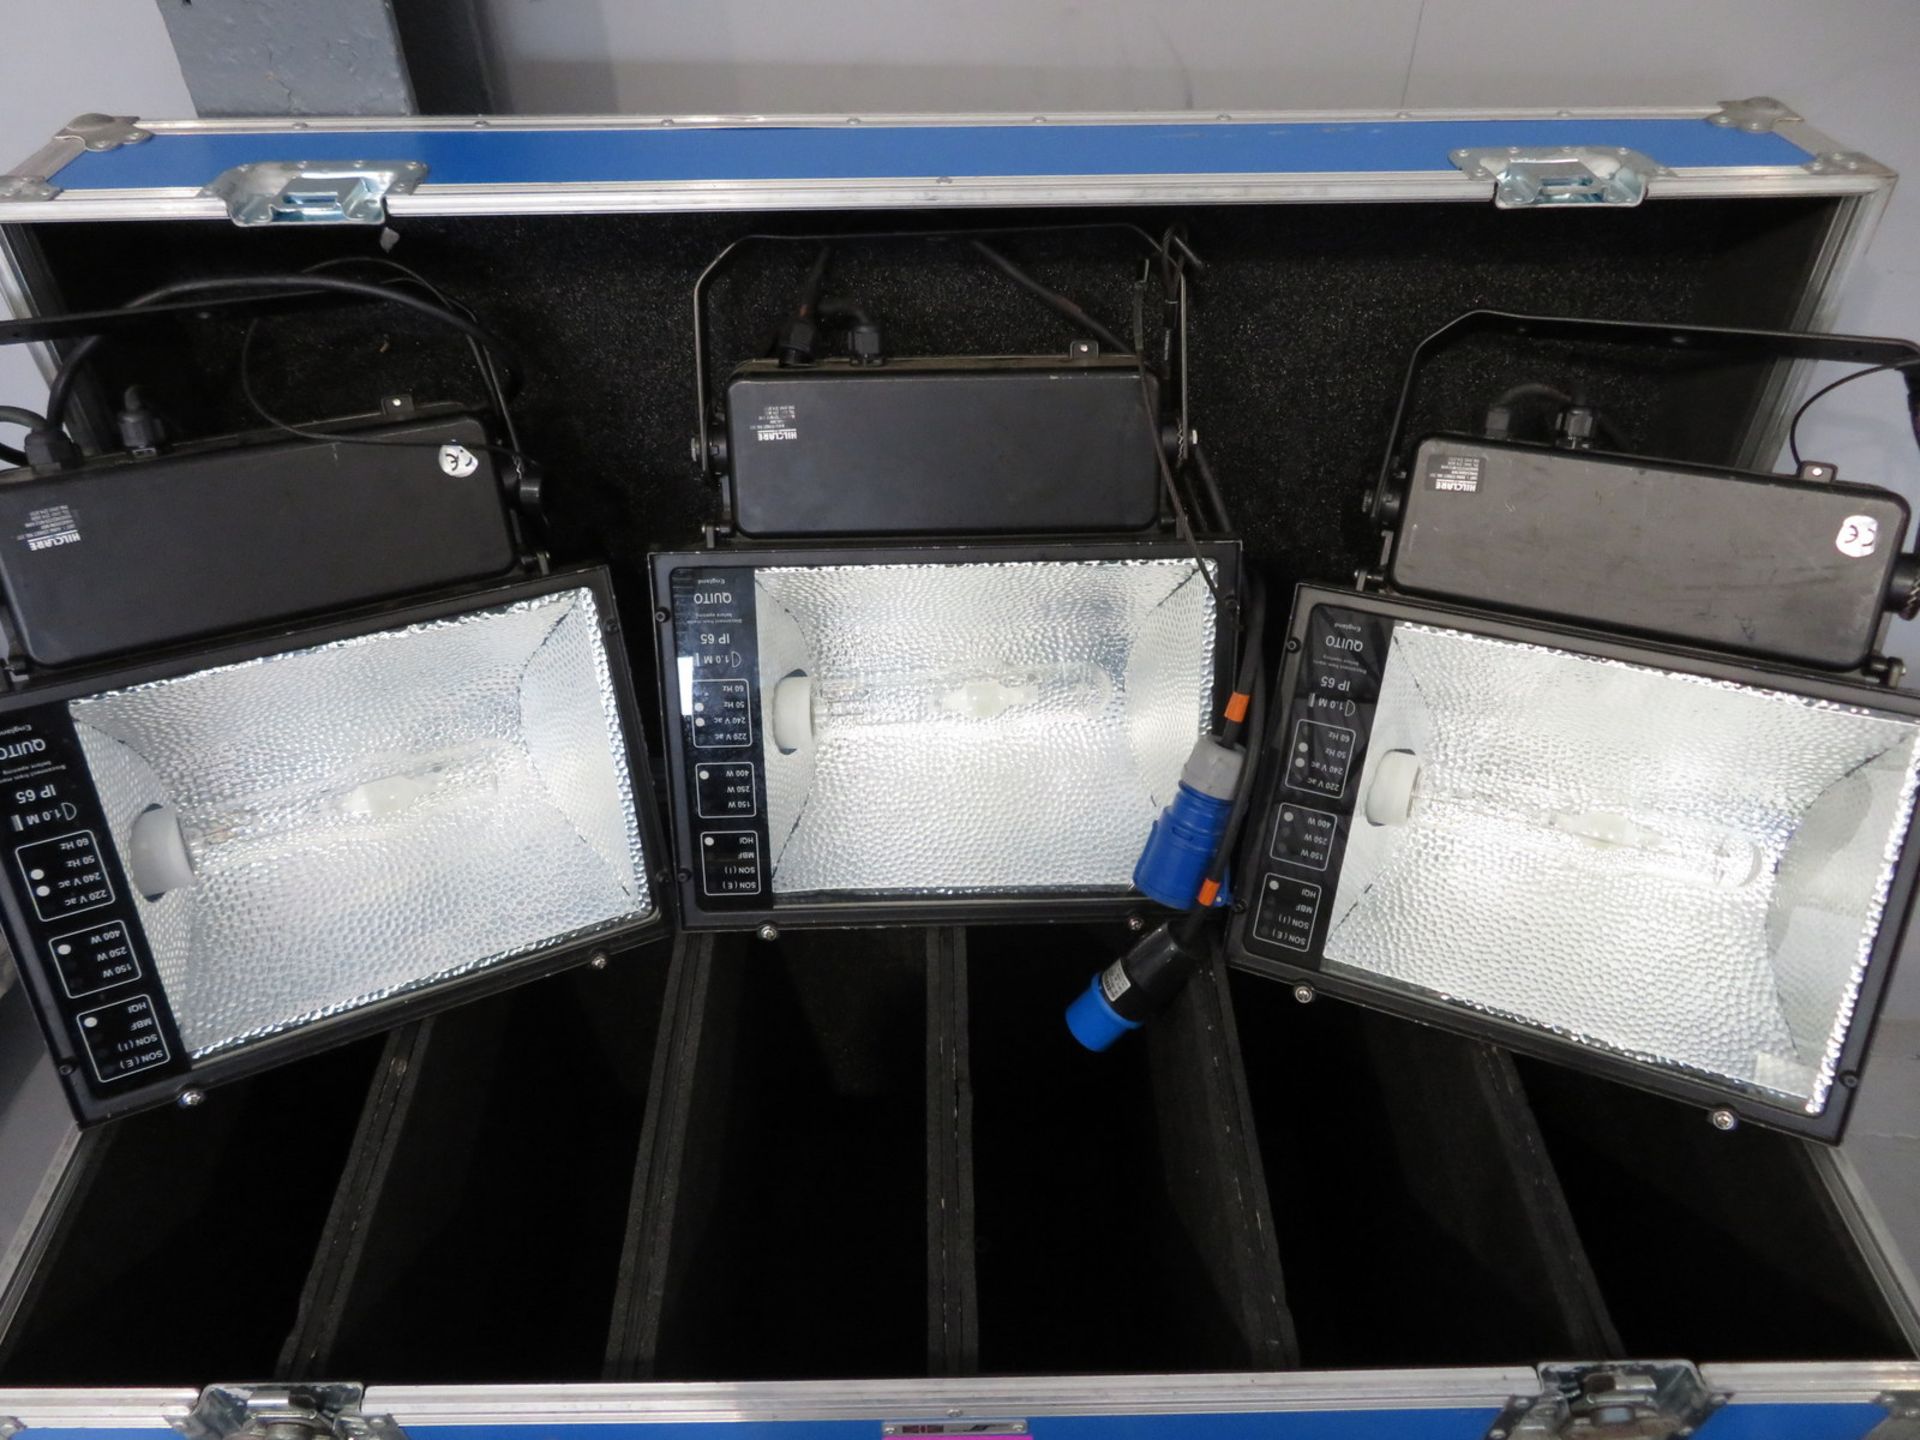 6x HQI 400w Floodlights in flight case. Includes safety bonds. Working condition. - Image 2 of 7